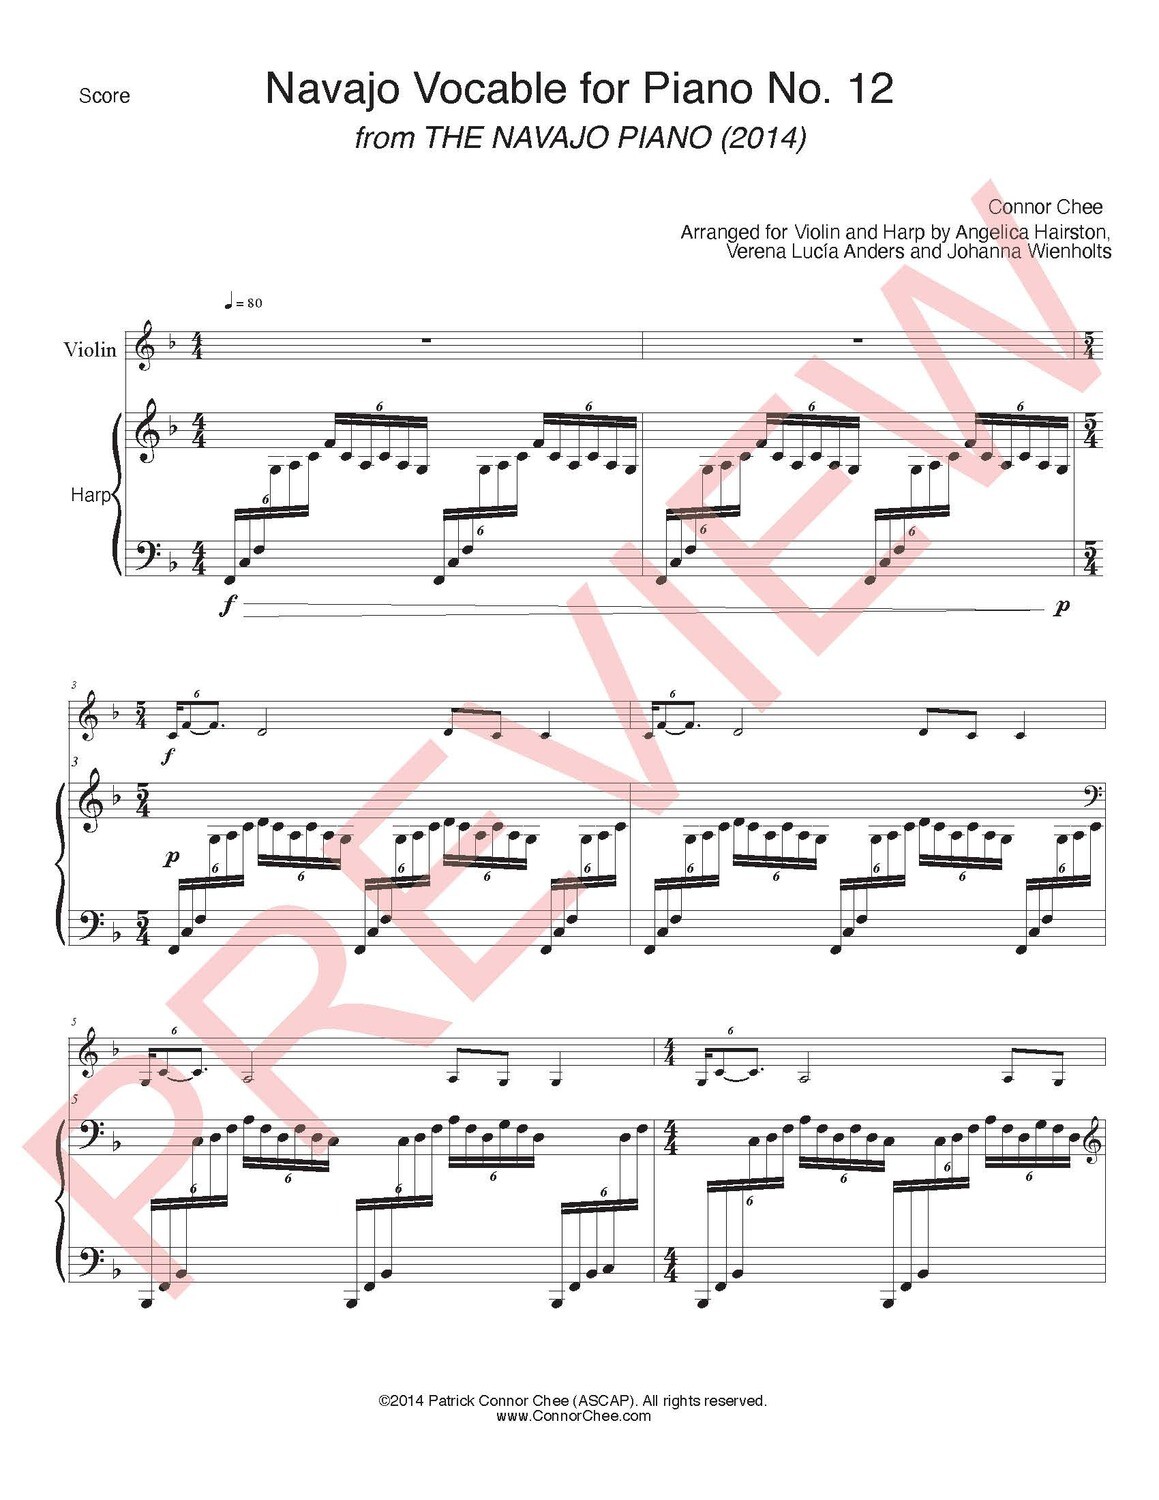 Digital Sheet Music - Navajo Vocable No. 12 (Arranged for Violin and Harp) (Connor Chee)